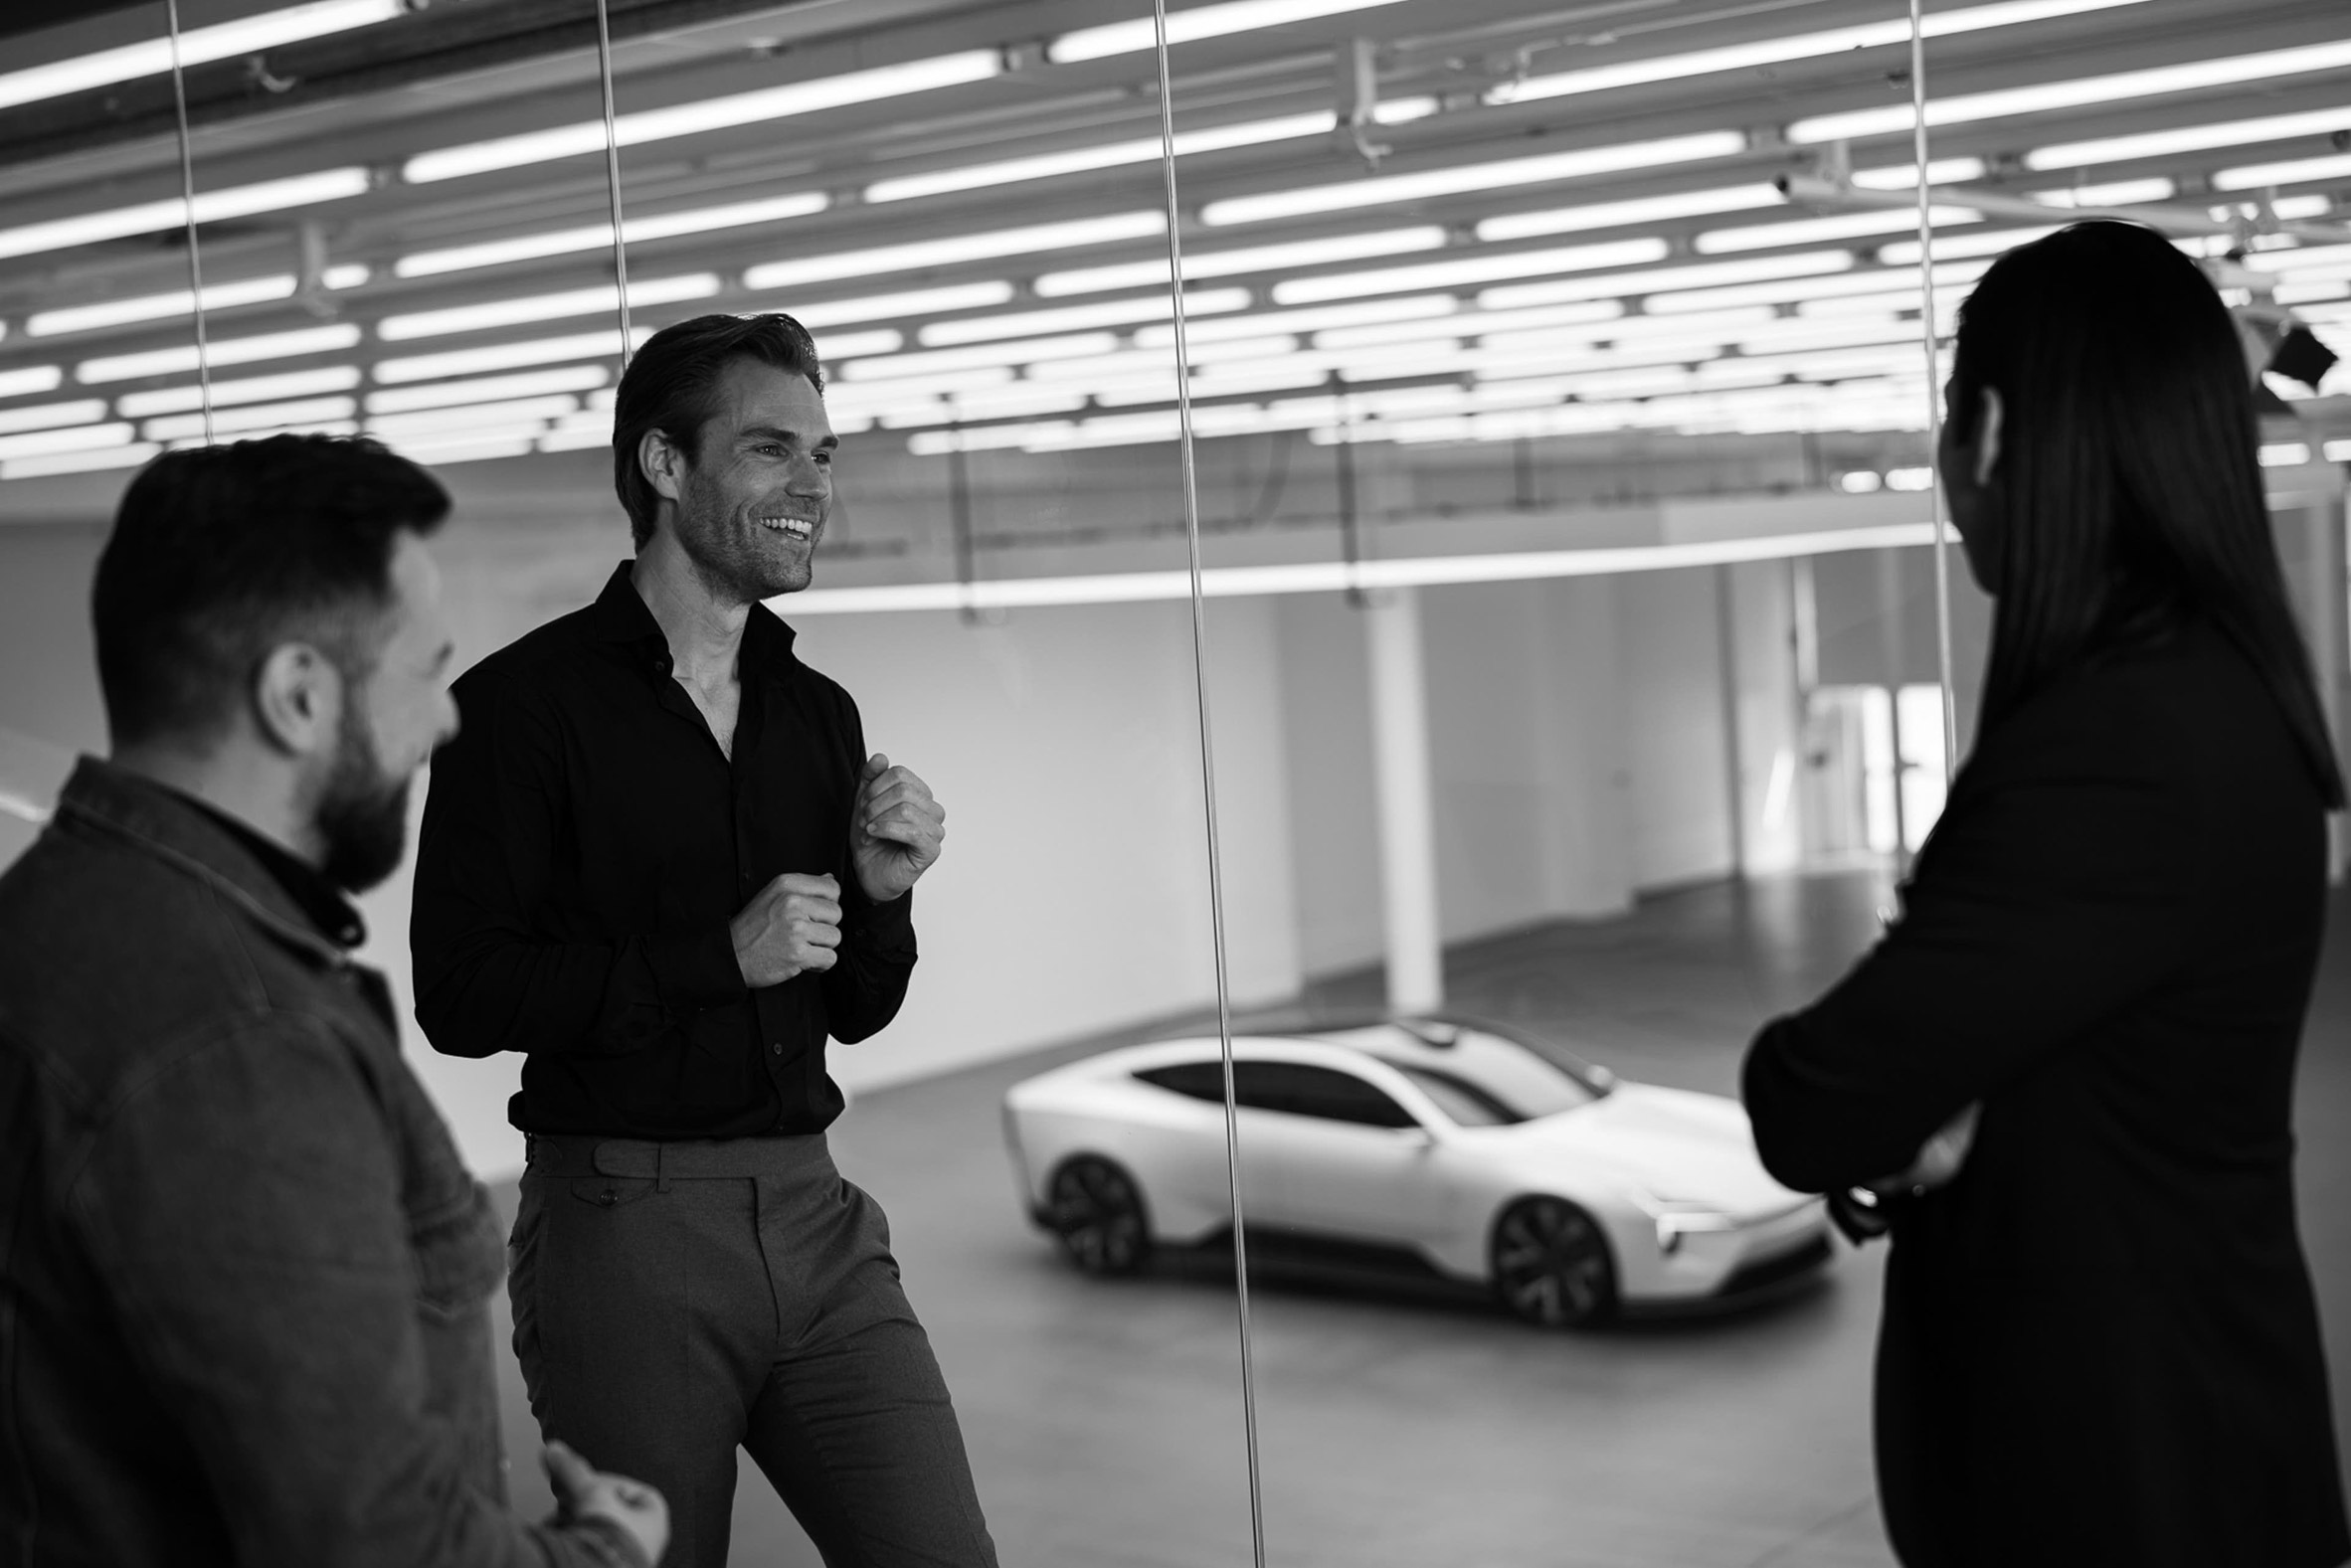 A photograph of people in front of a Polestar car